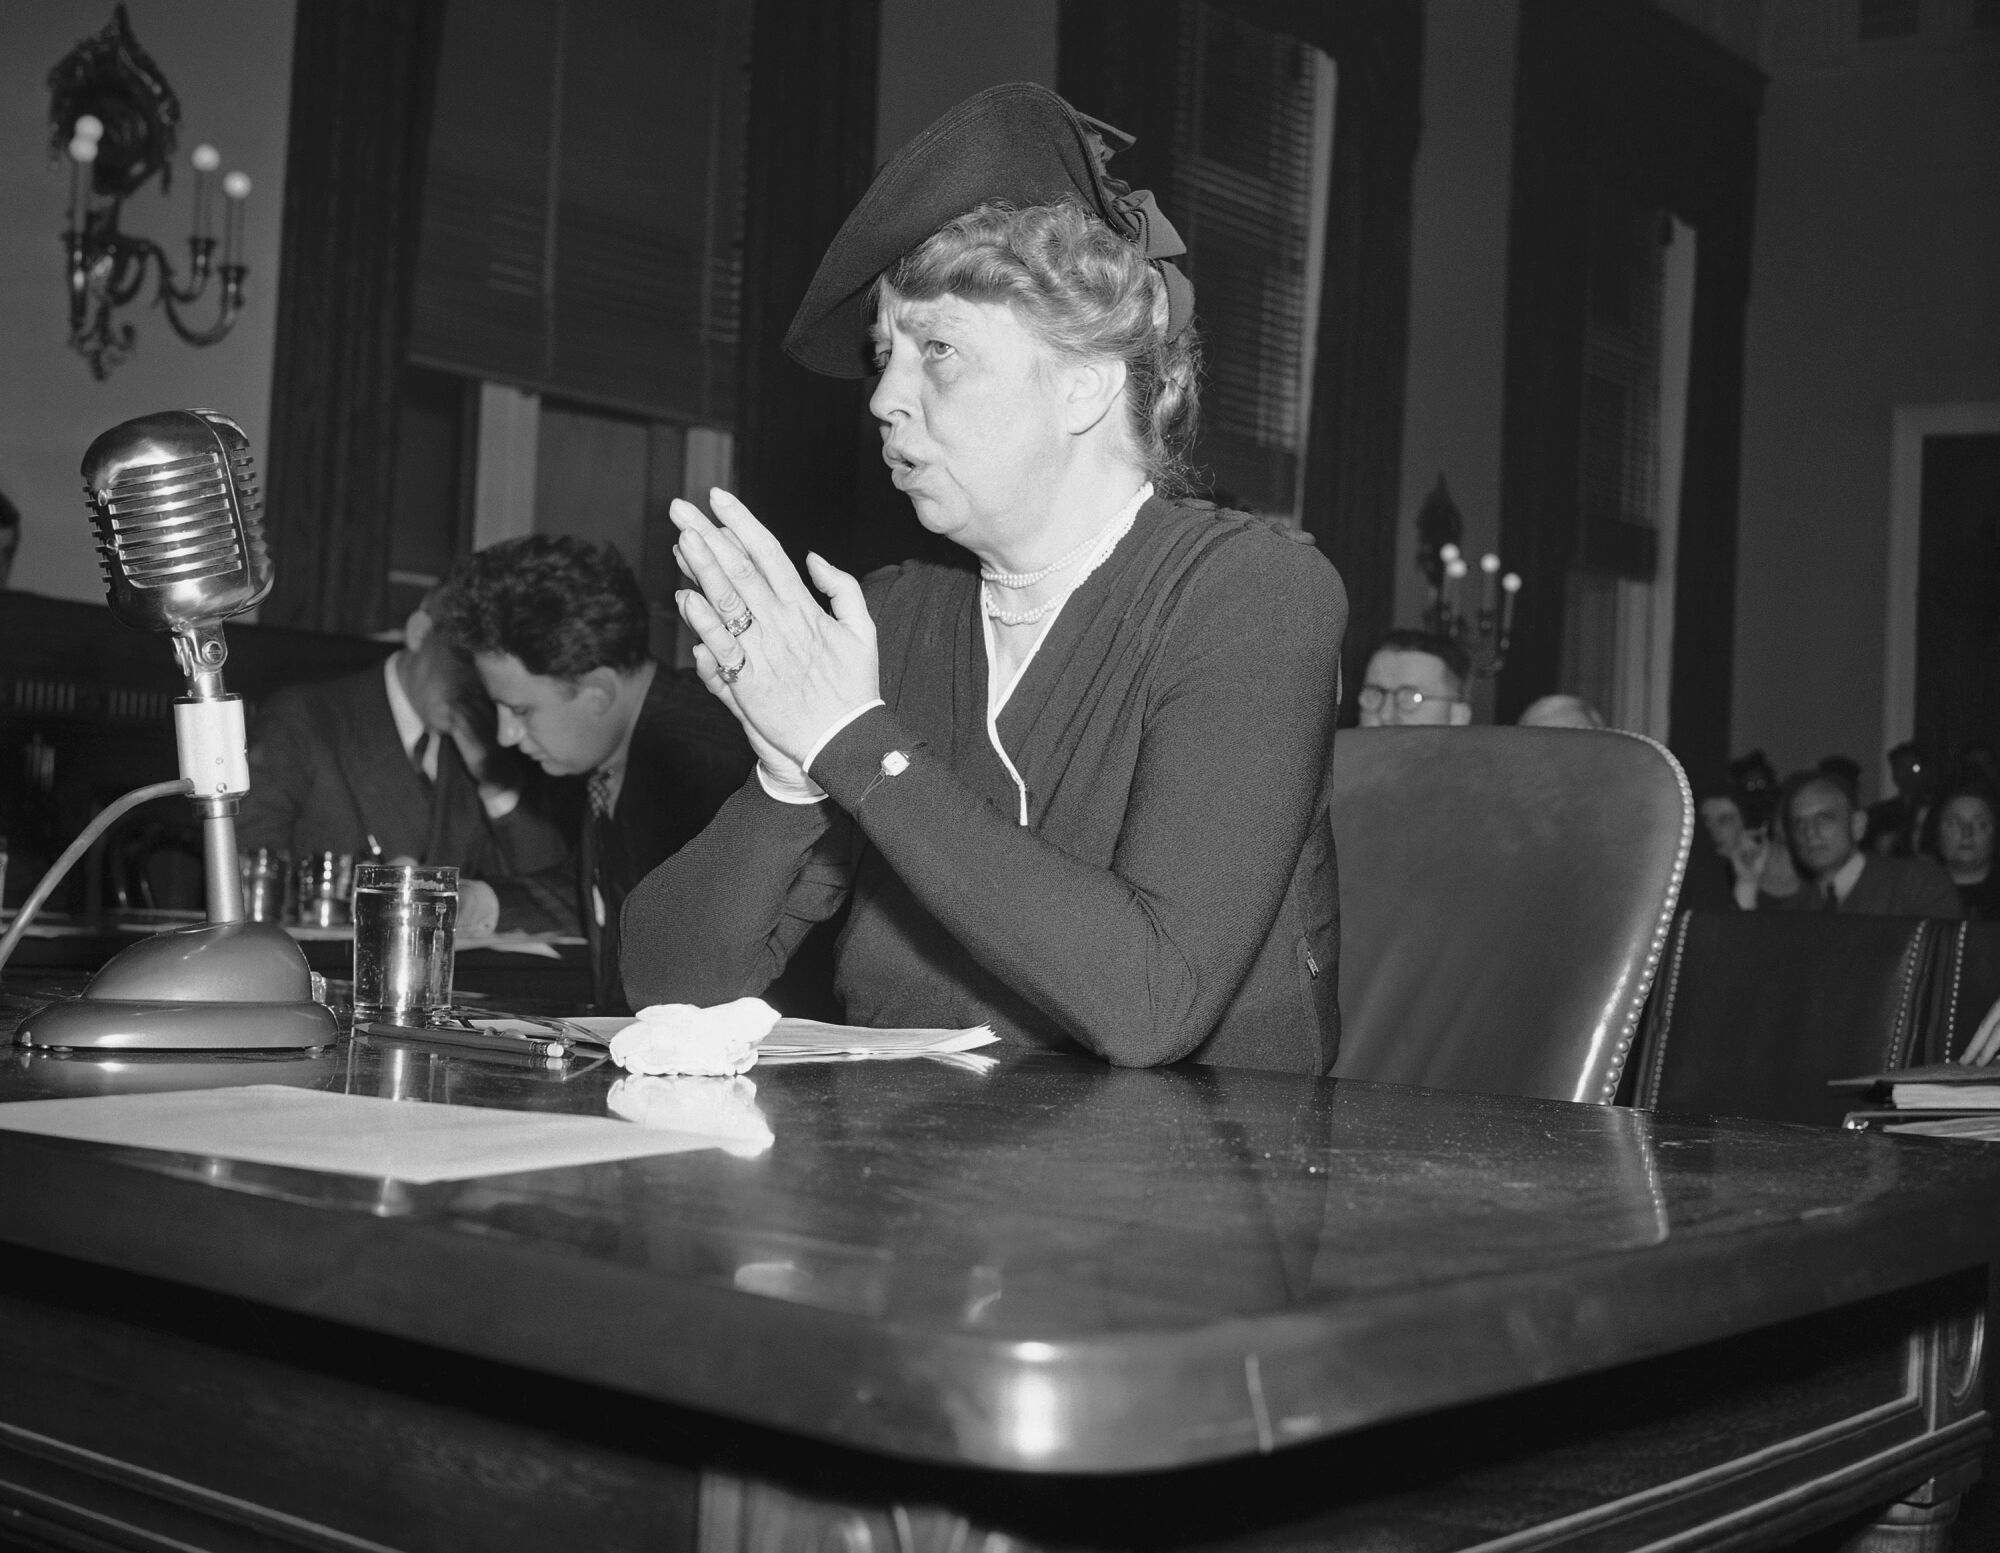 First Lady Eleanor Roosevelt, here testifying before Congress in 1942.